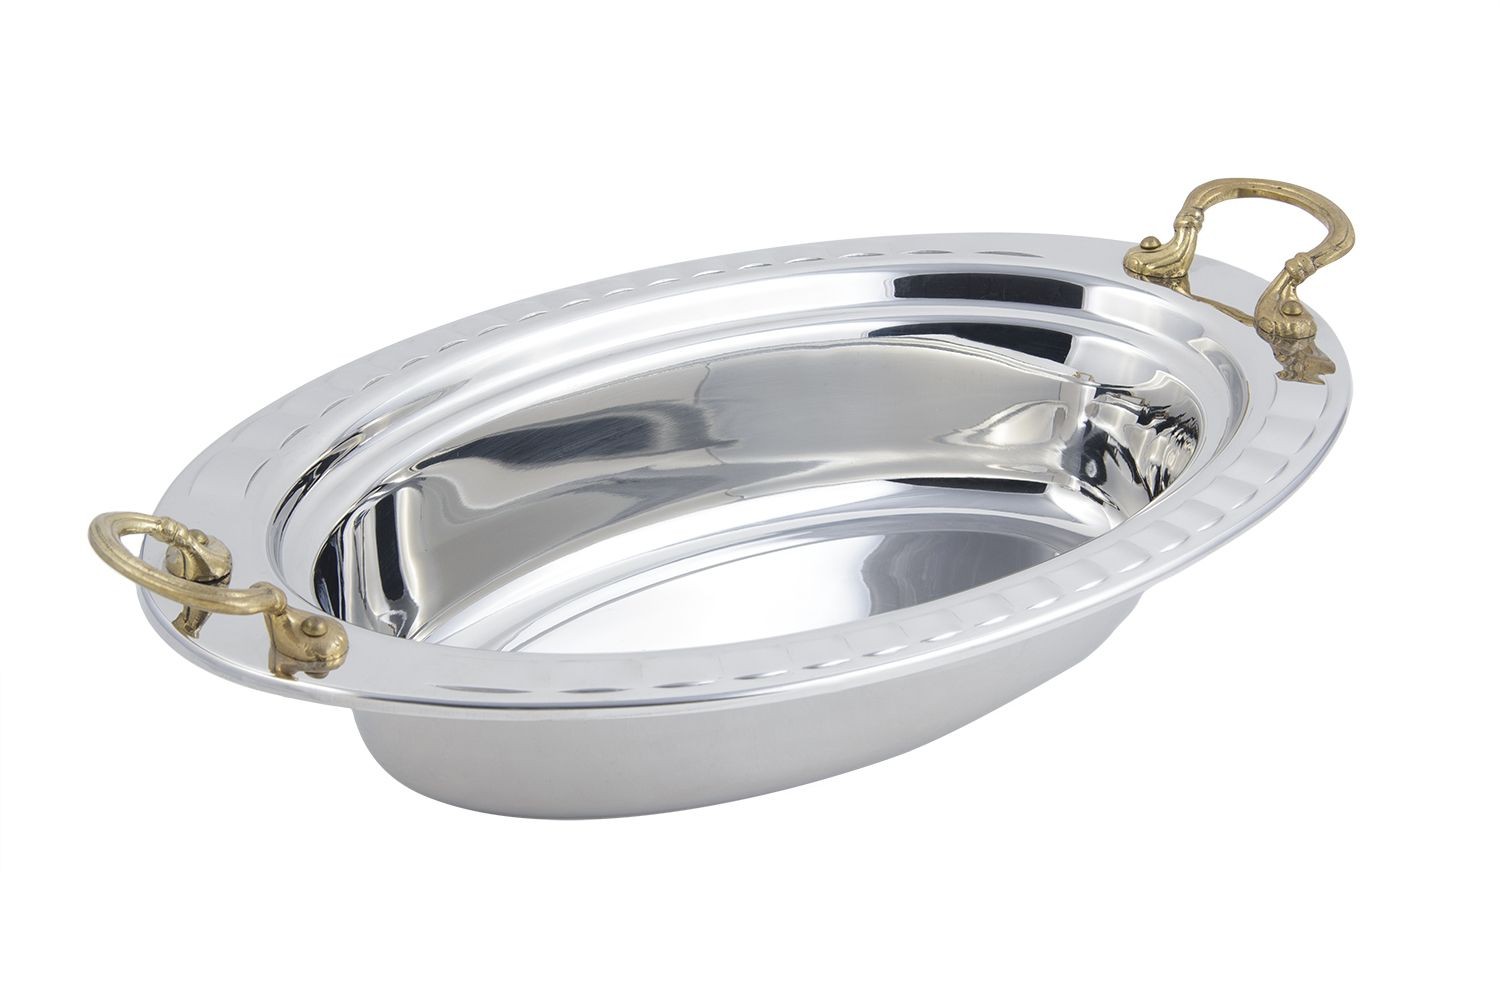 Bon Chef 5699HR Arches Design Oval Pan with Round Brass Handles, 6 Qt.